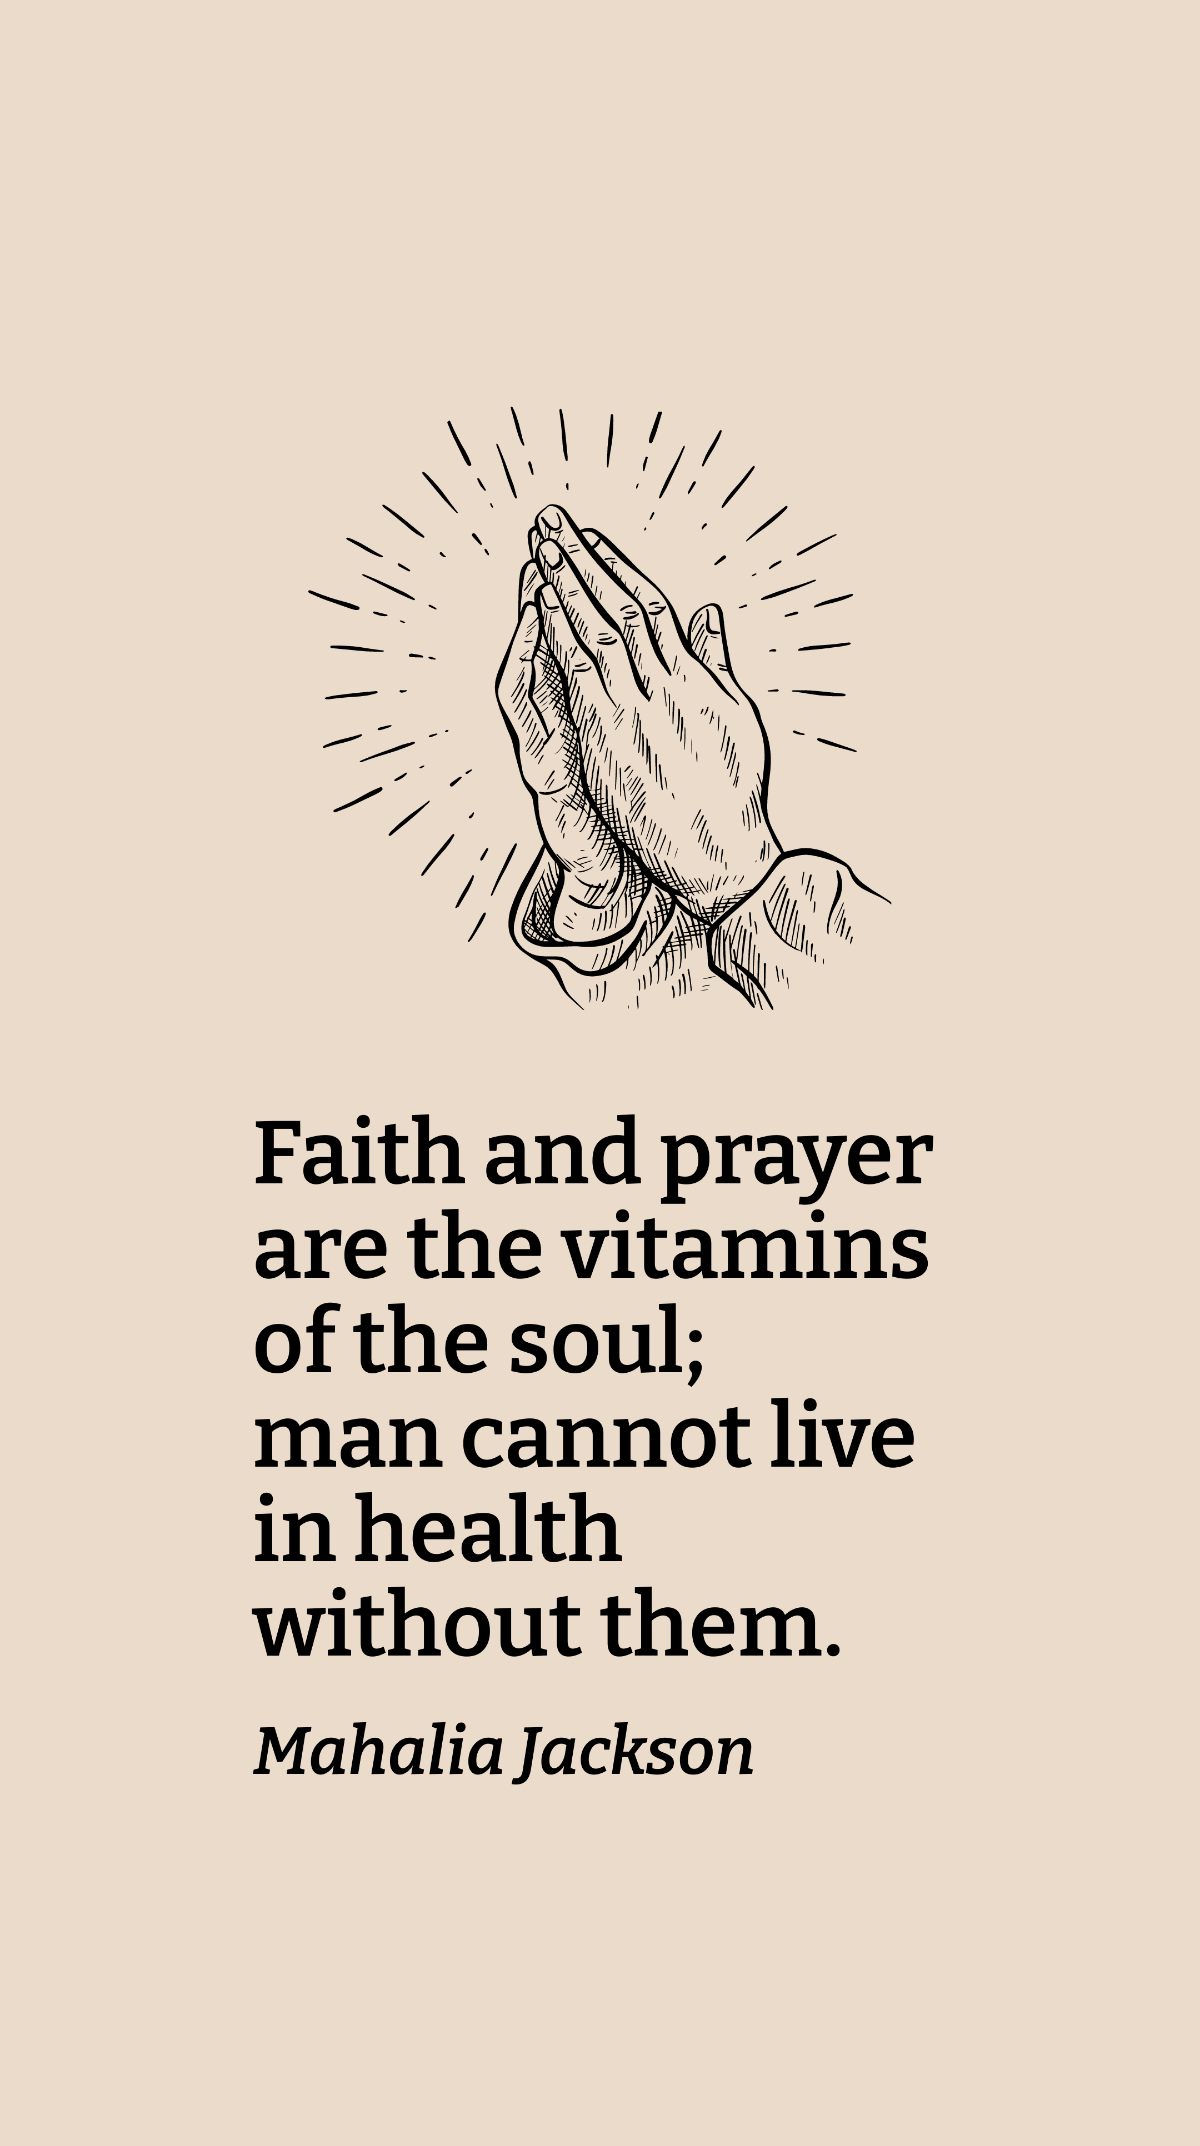 Mahalia Jackson - Faith and prayer are the vitamins of the soul; man cannot live in health without them.